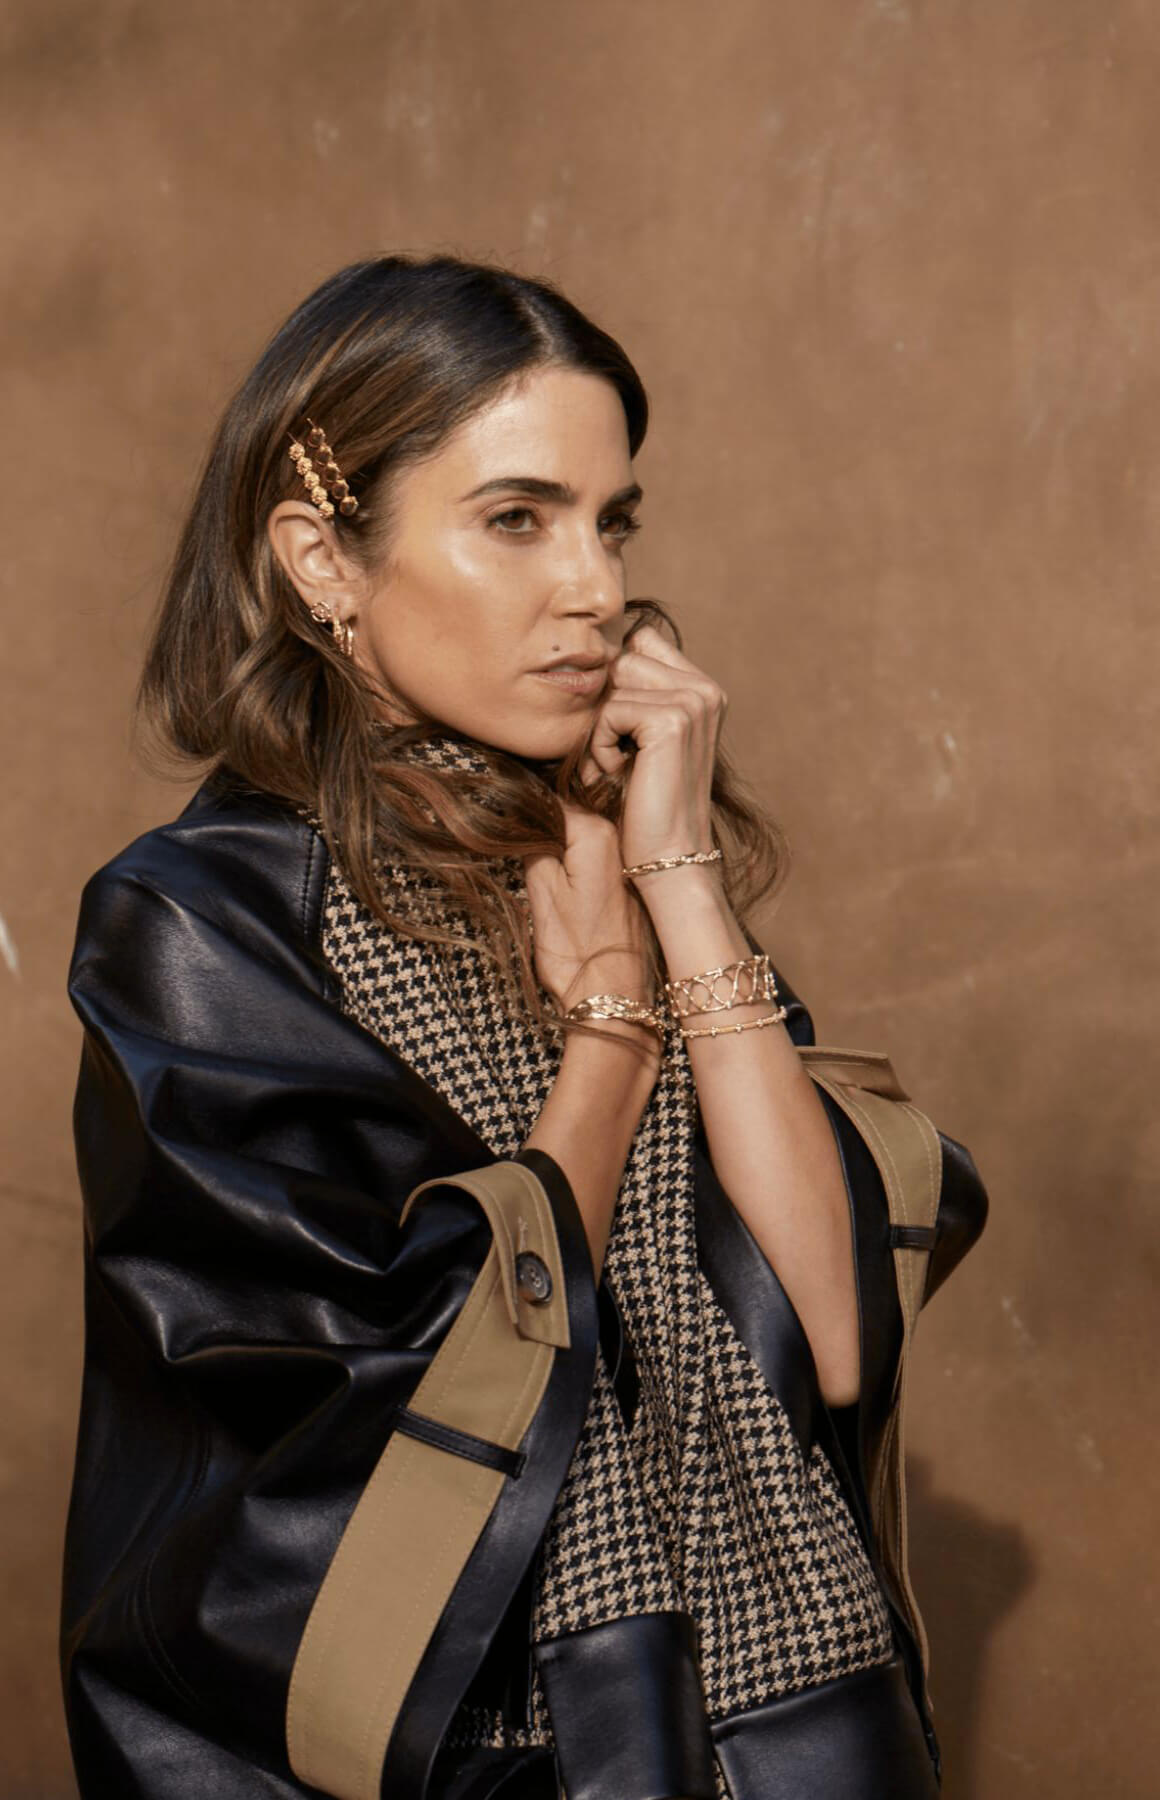 Nikki Reed for Bayou with Love 2020 Hair Pins Collection Photos 04/12/2020